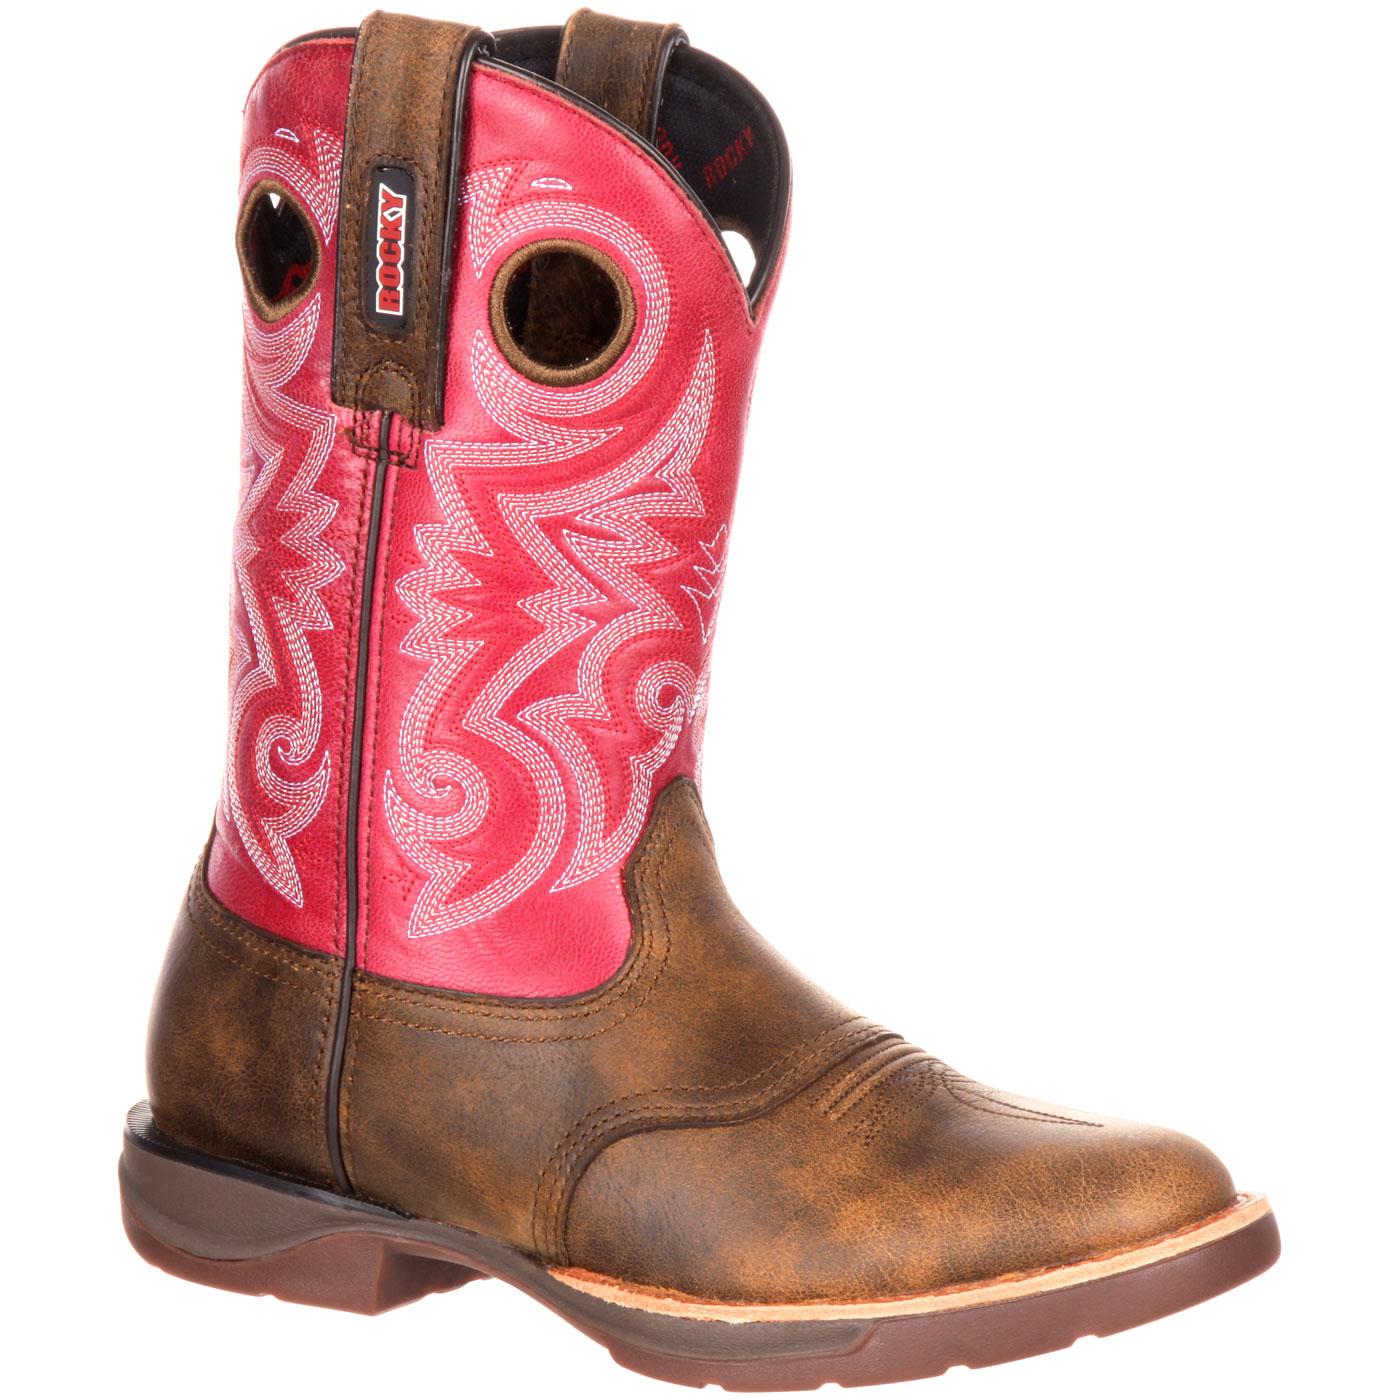 Rocky LT - Women's Brown-Cherry Pink Saddle Western Boots